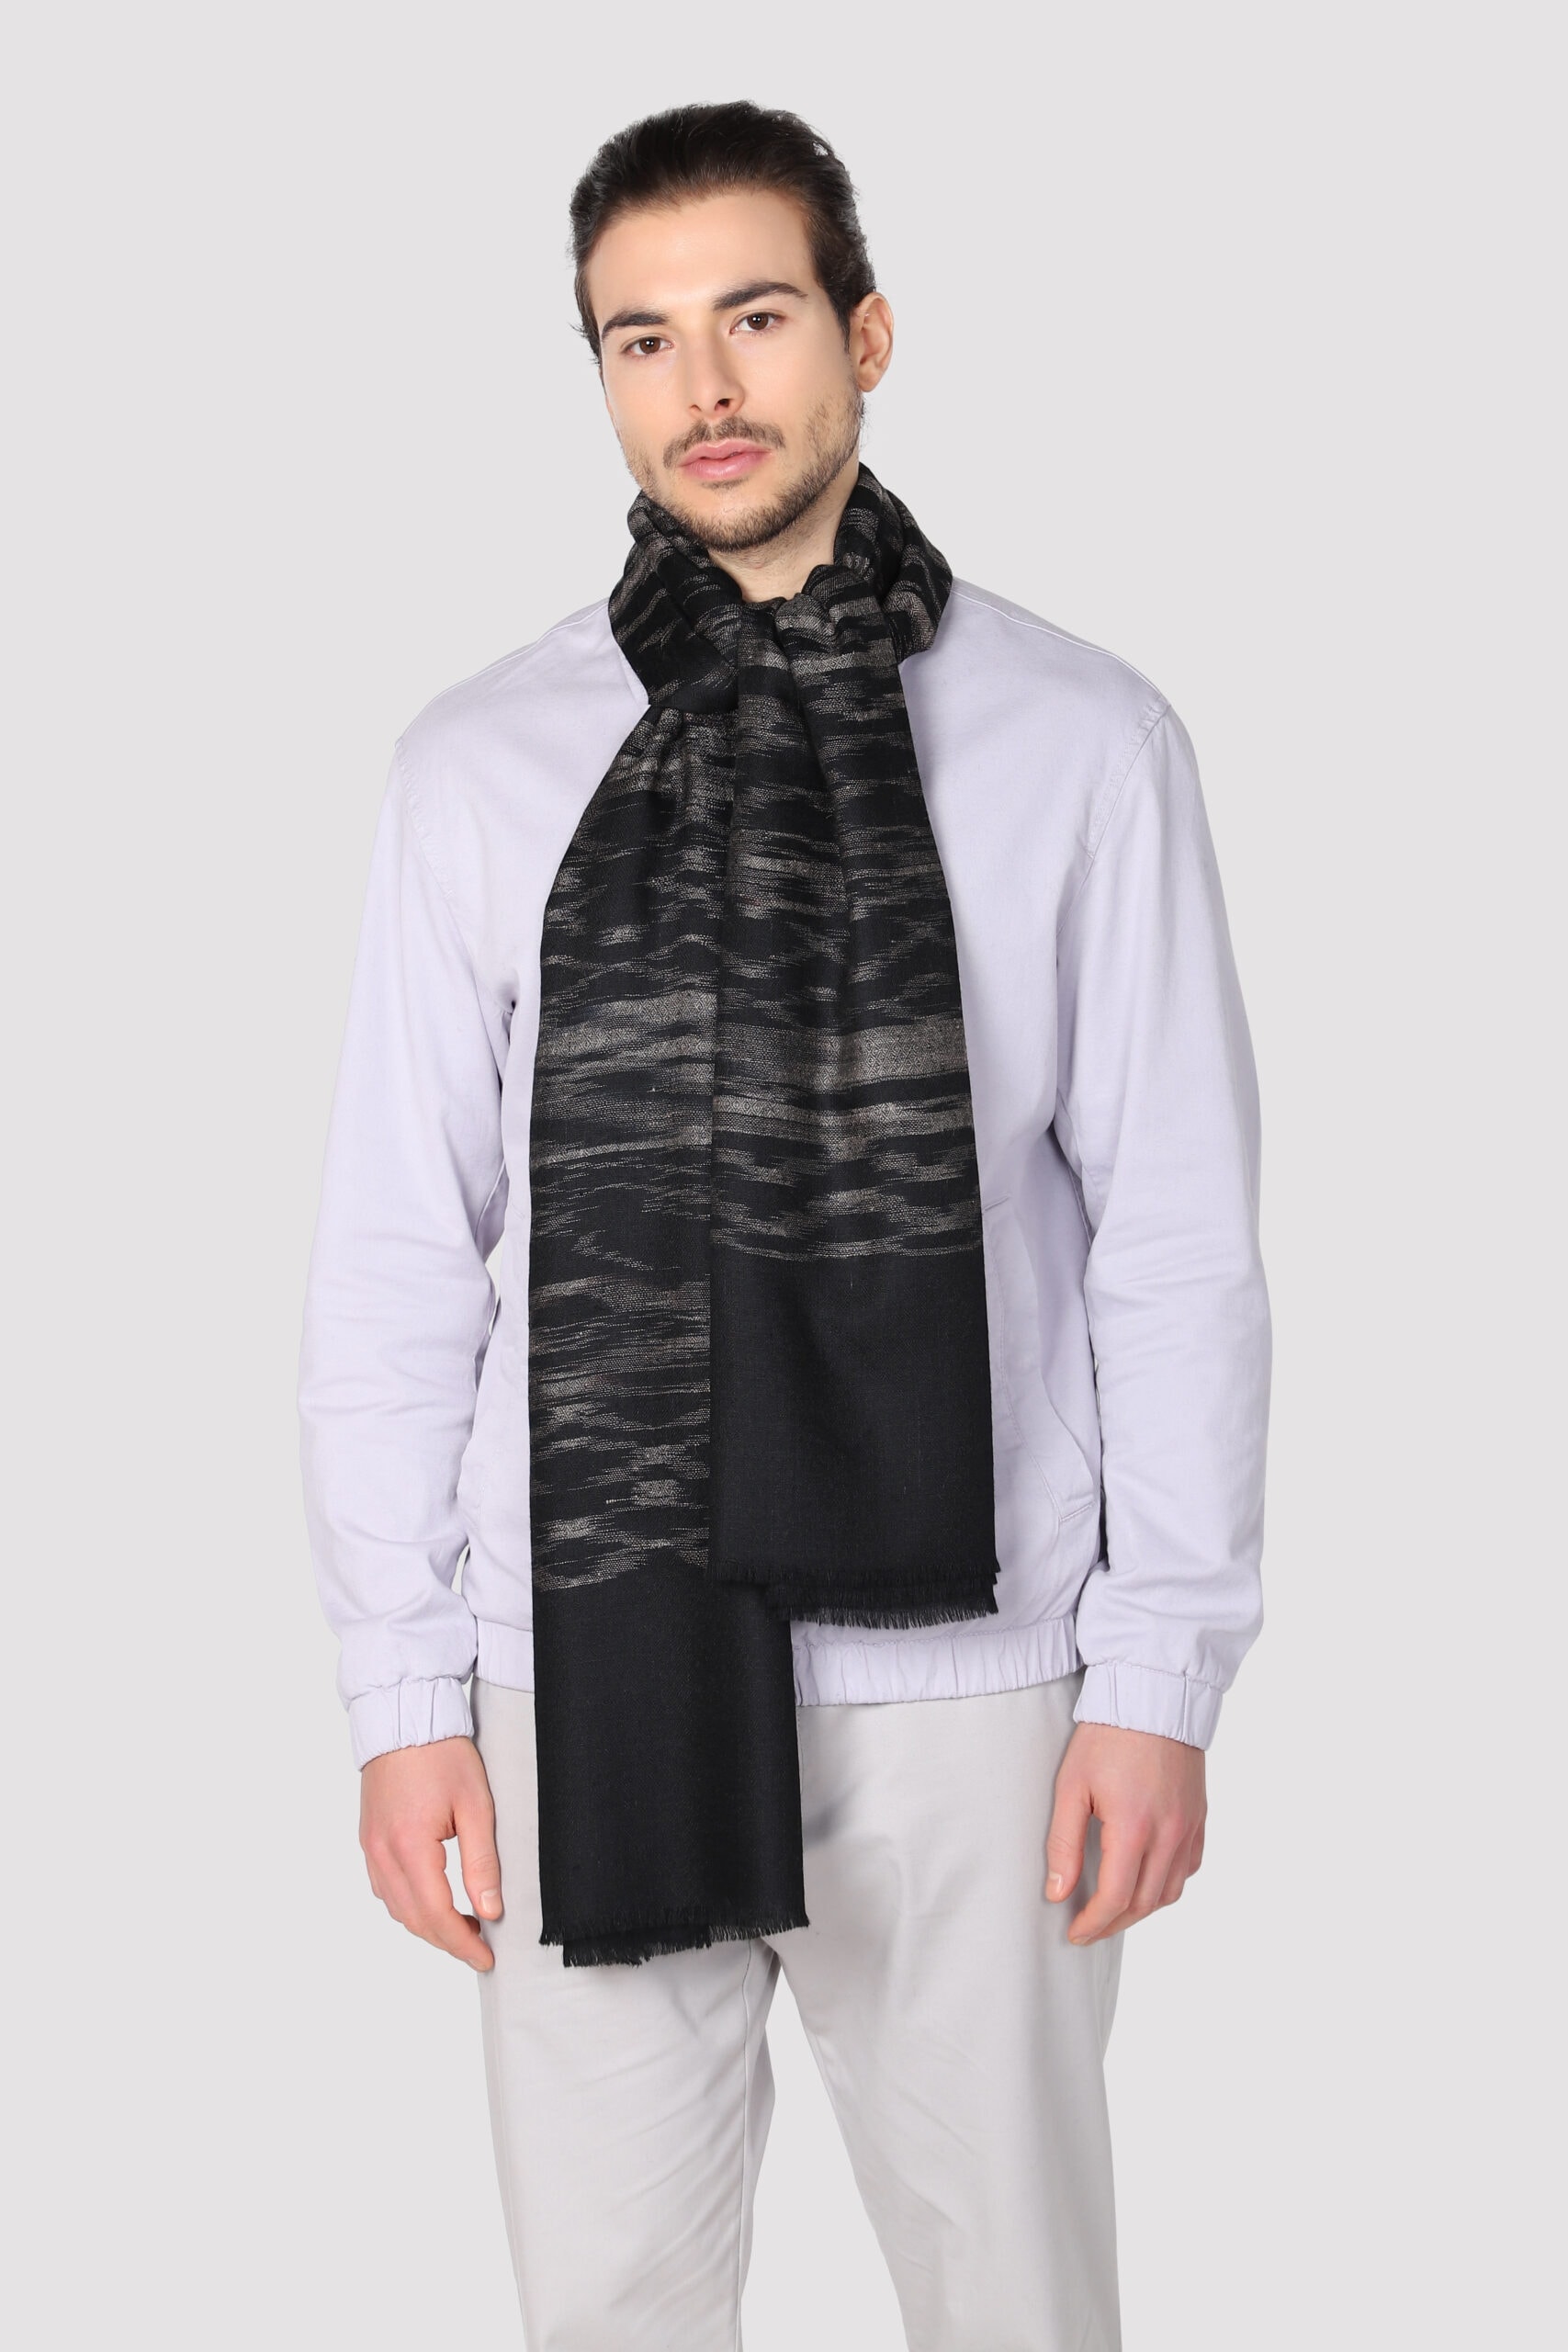 Model in Ikat cashmere shawl with grey colored shades scattered all over the black surface - MeandK